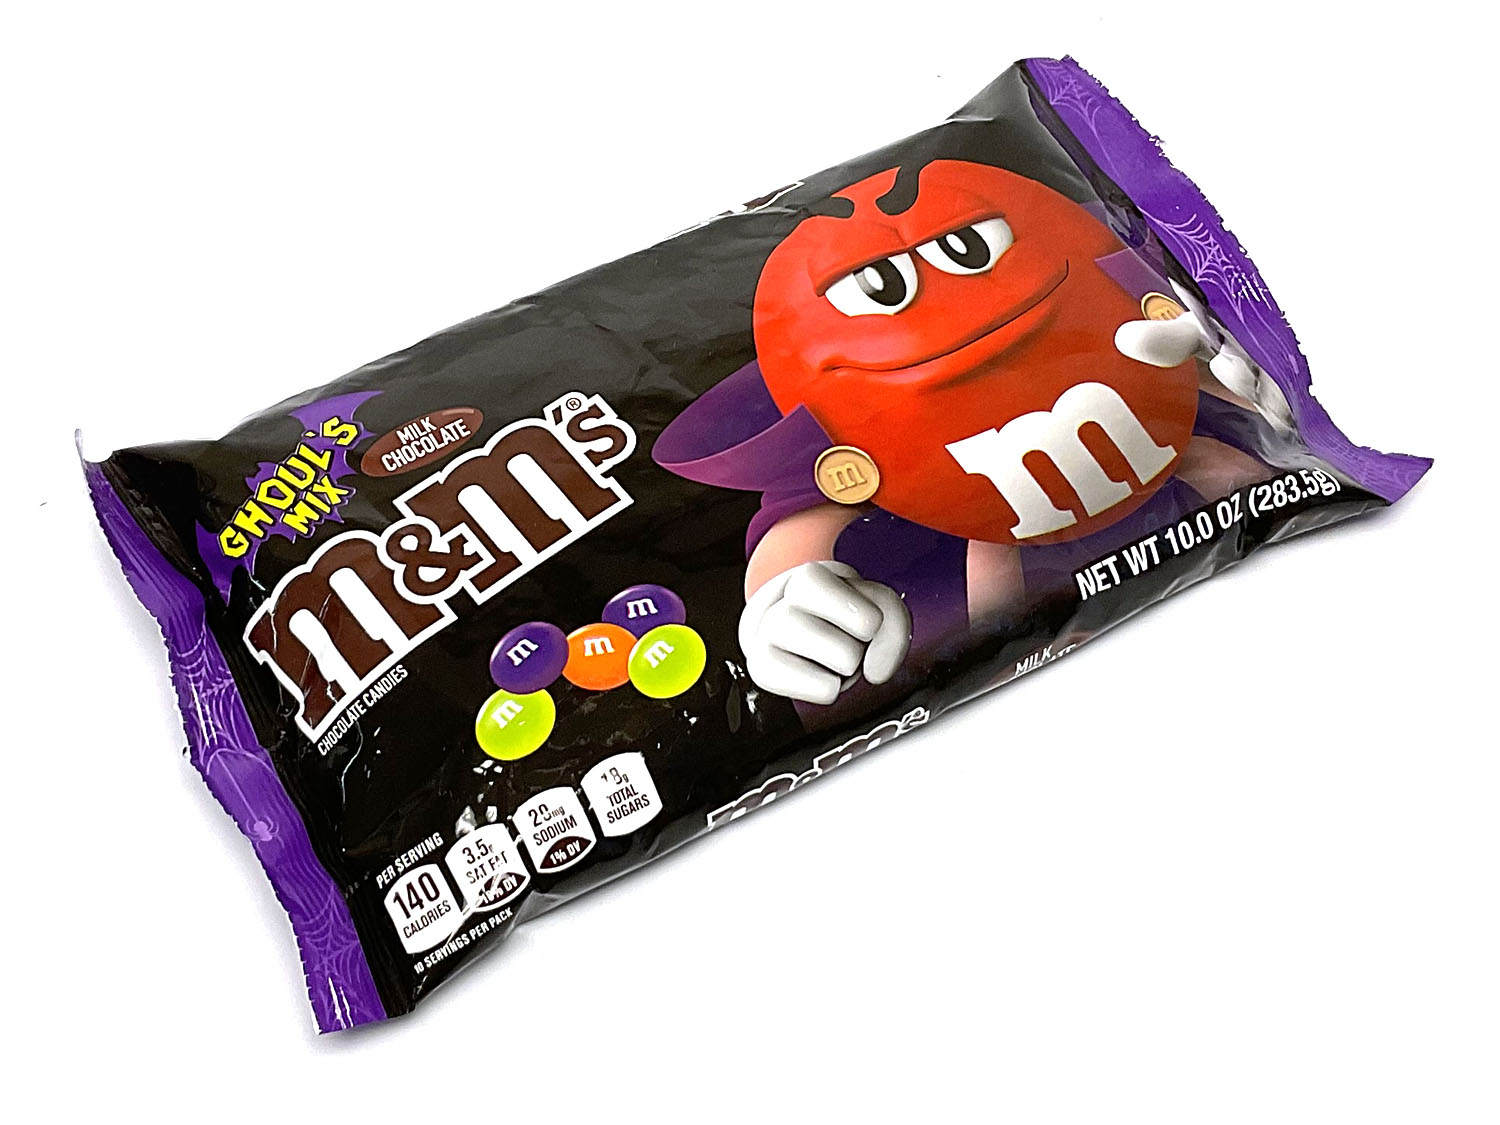 MMs plain candy party size bag